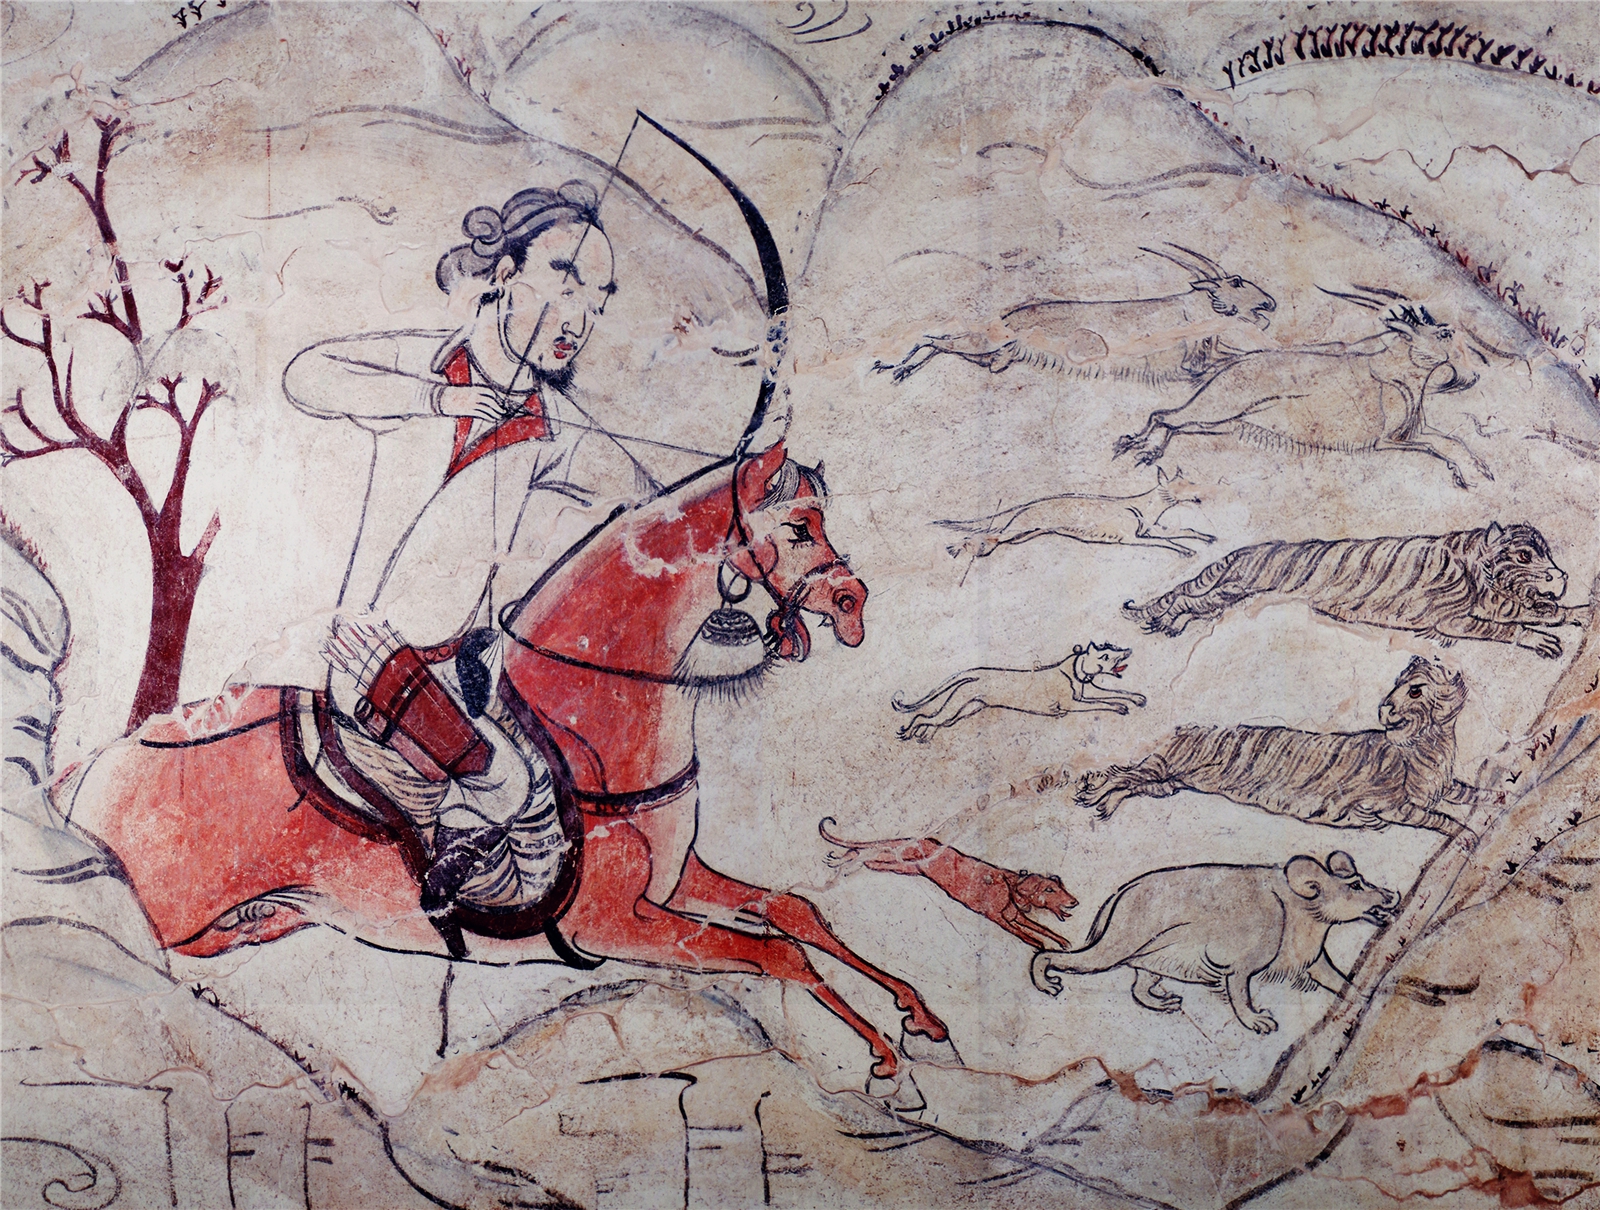 Evolving Identities in Sixth-Century East Asia